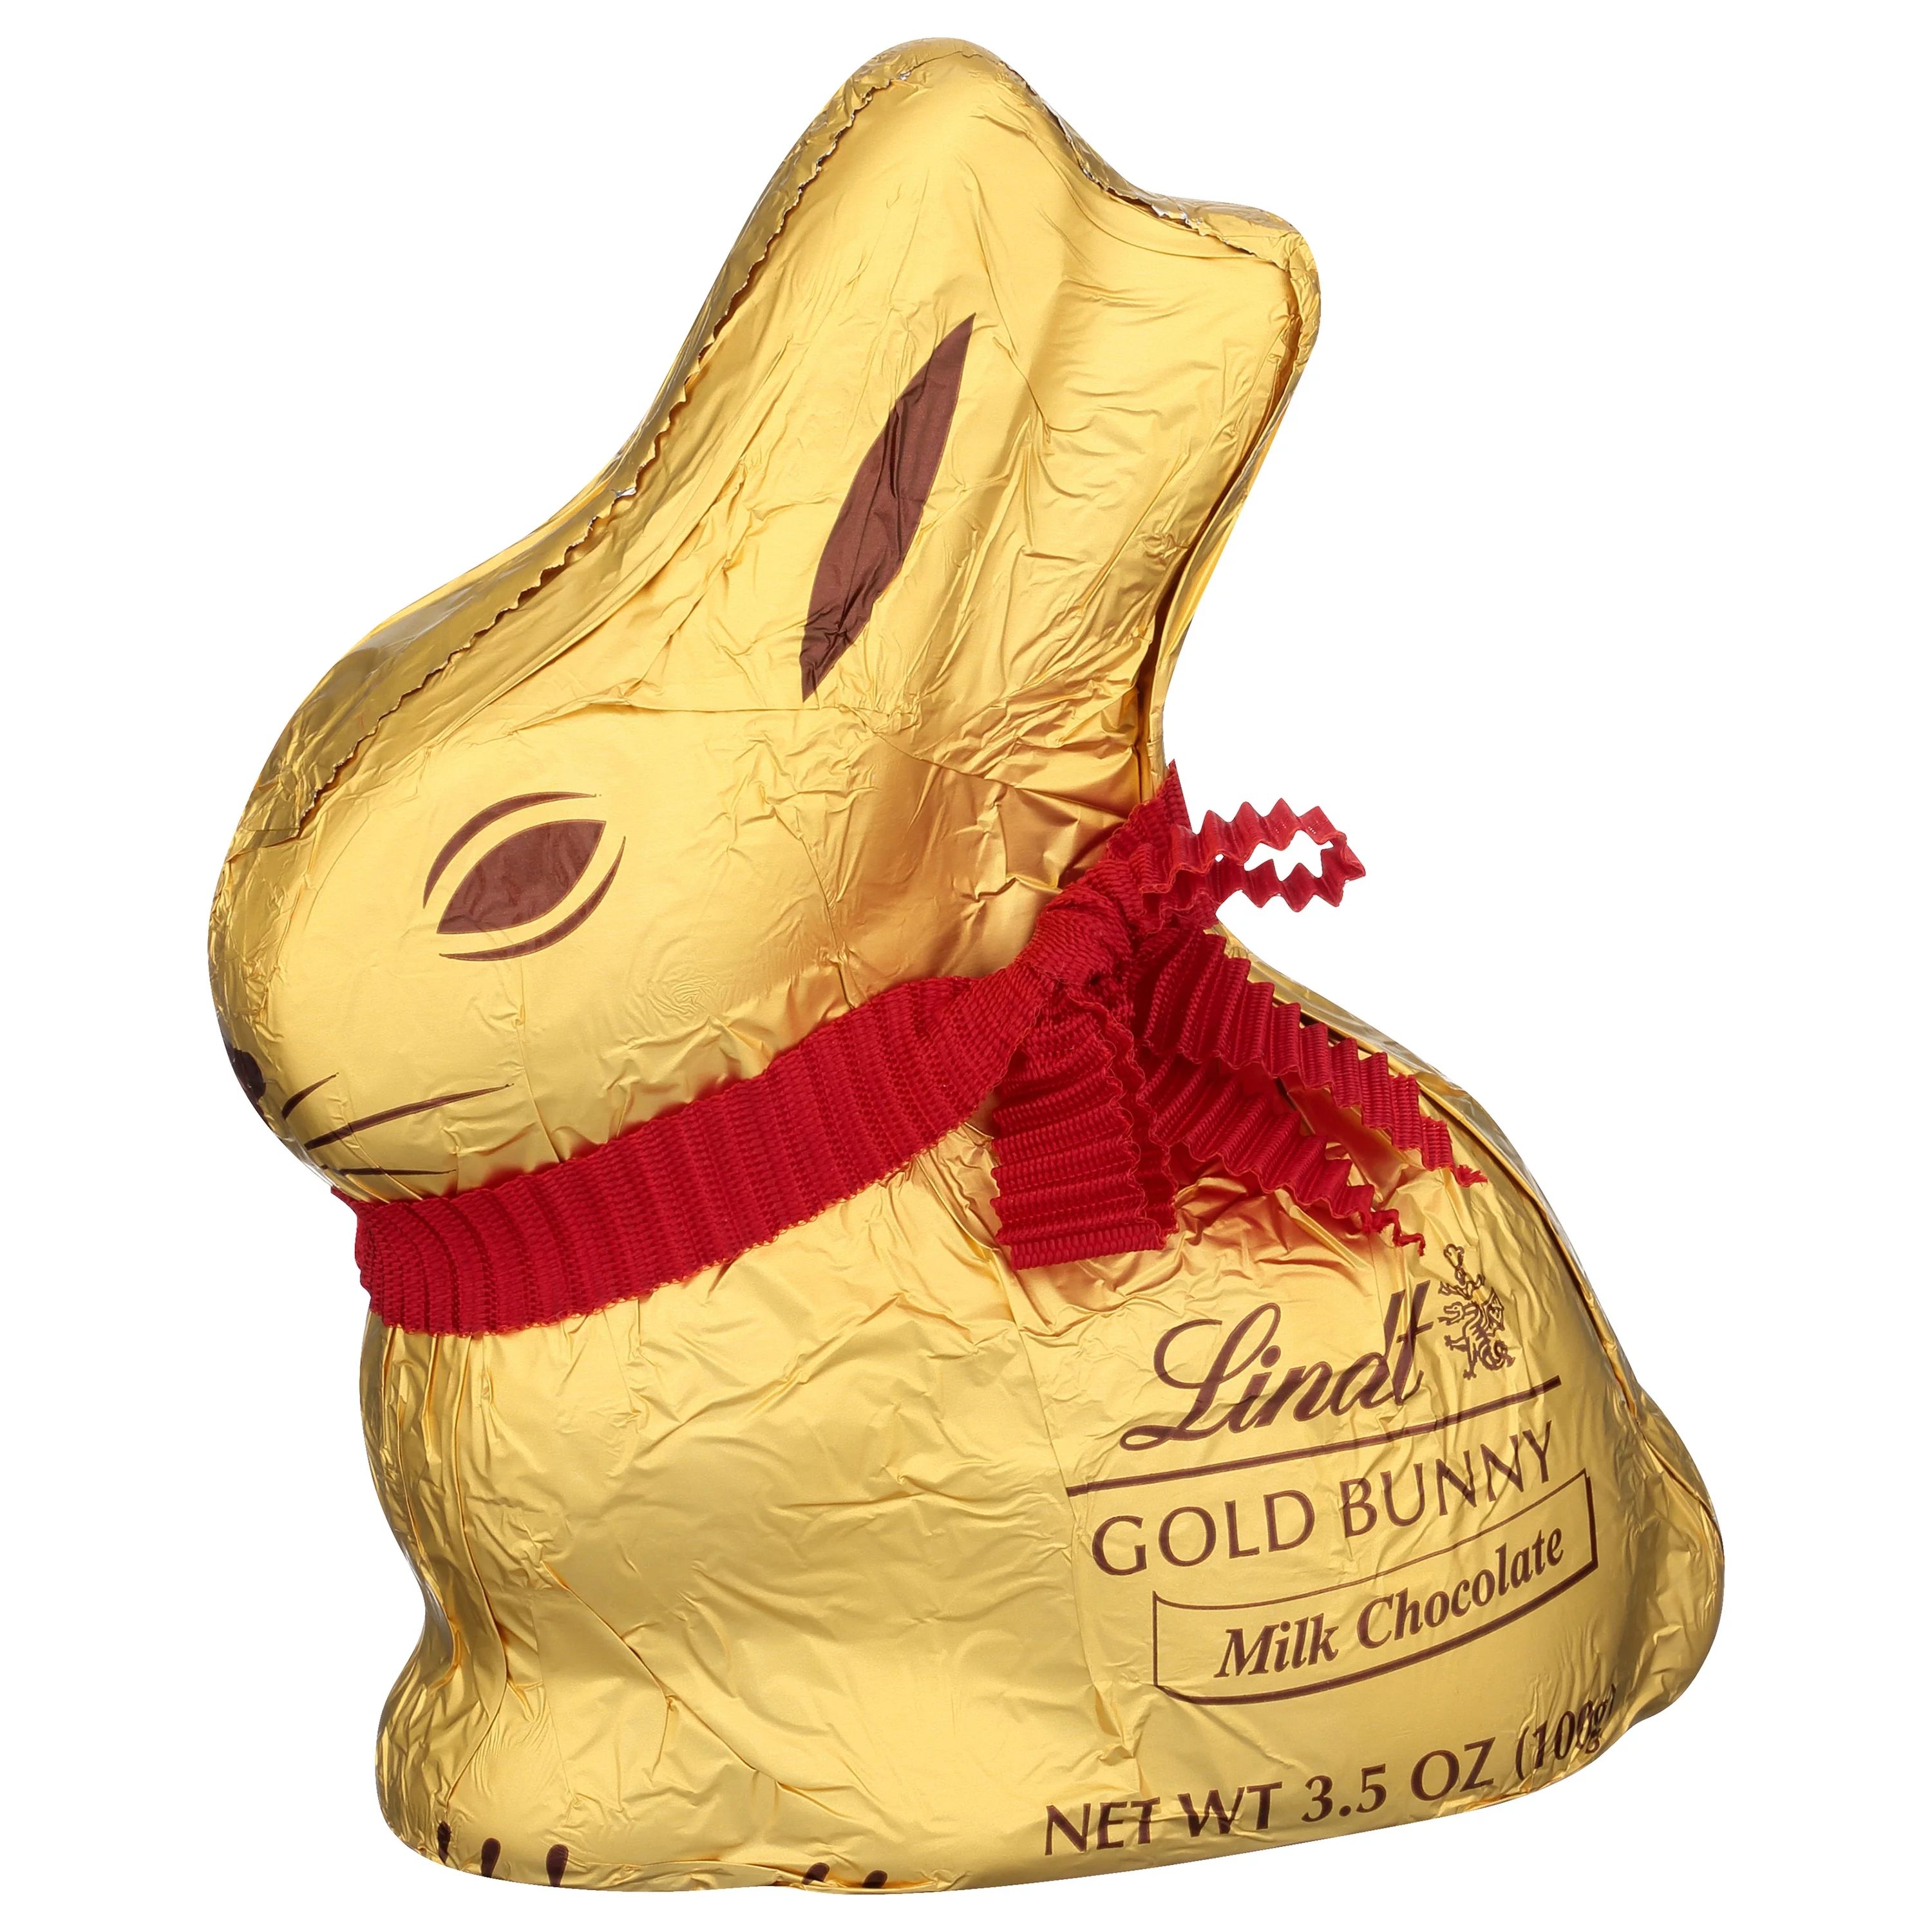 Lindt Gold Bunny, Milk Chocolate, Easter Chocolate Candy Bunny, 3.5 oz, 1 Count | Walmart (US)